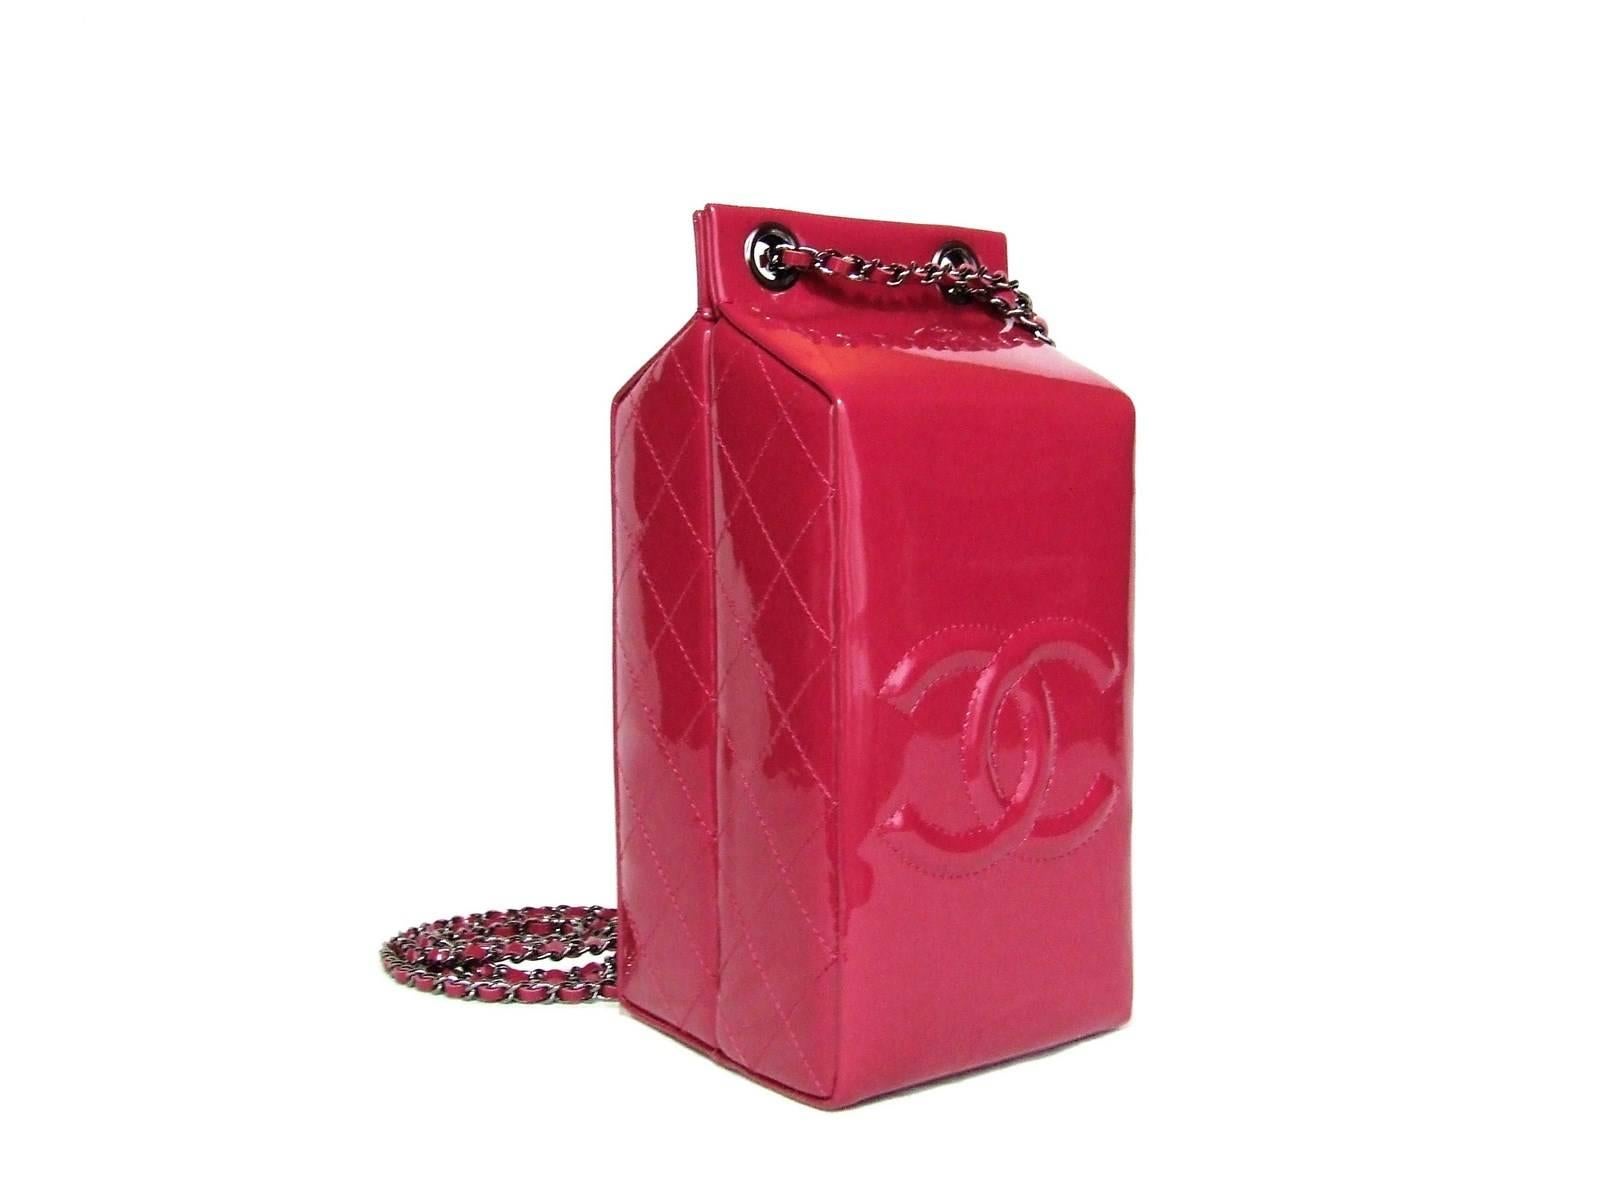 GORGEOUS AUTHENTIC CHANEL BAG

Milk Bottle Bag

Limited Edition 

Made of Patent Leather 

Colorway: It may appear different from a screen to another. The real color is raspberry 

Traditional Quilted Pattern on each side 

